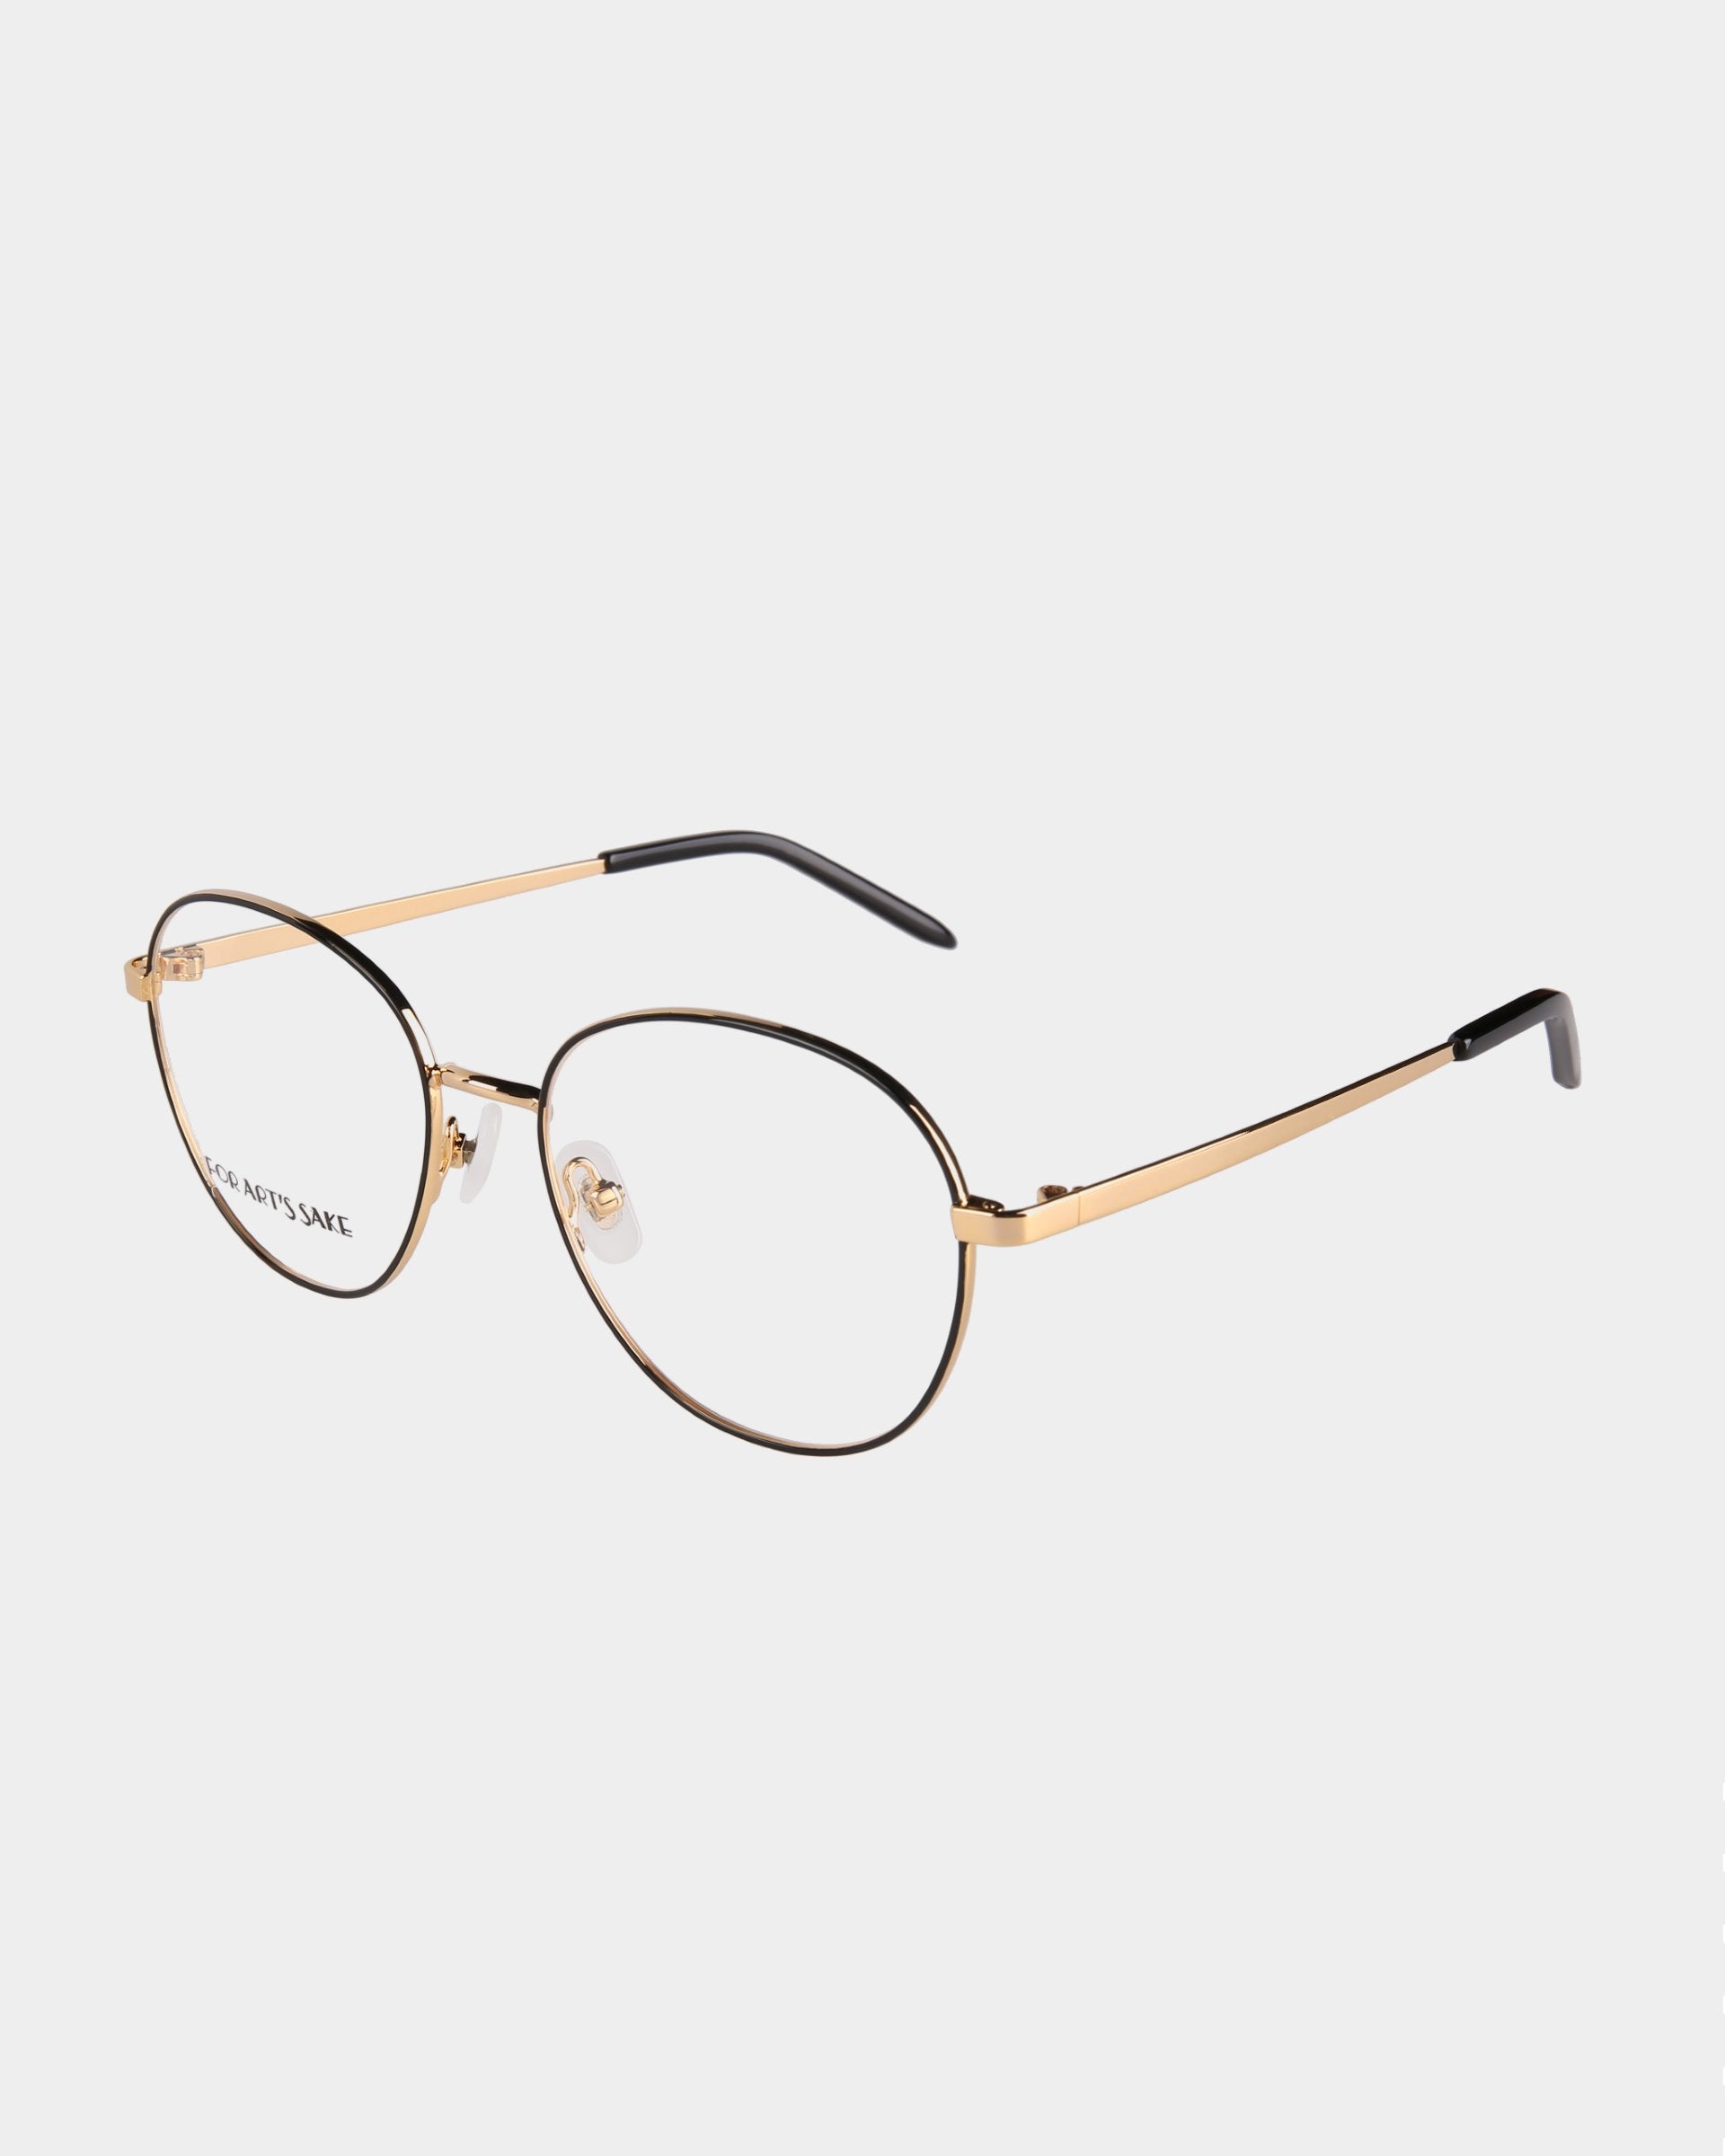 A pair of stylish eyeglasses with thin gold-toned metal frames, black detailing on the top rim, and black temple tips. The lenses are round with a slightly geometric shape and feature adjustable nose pads. &quot;Hailey&quot; by For Art&#39;s Sake® is partially visible on the left lens. The background is white.